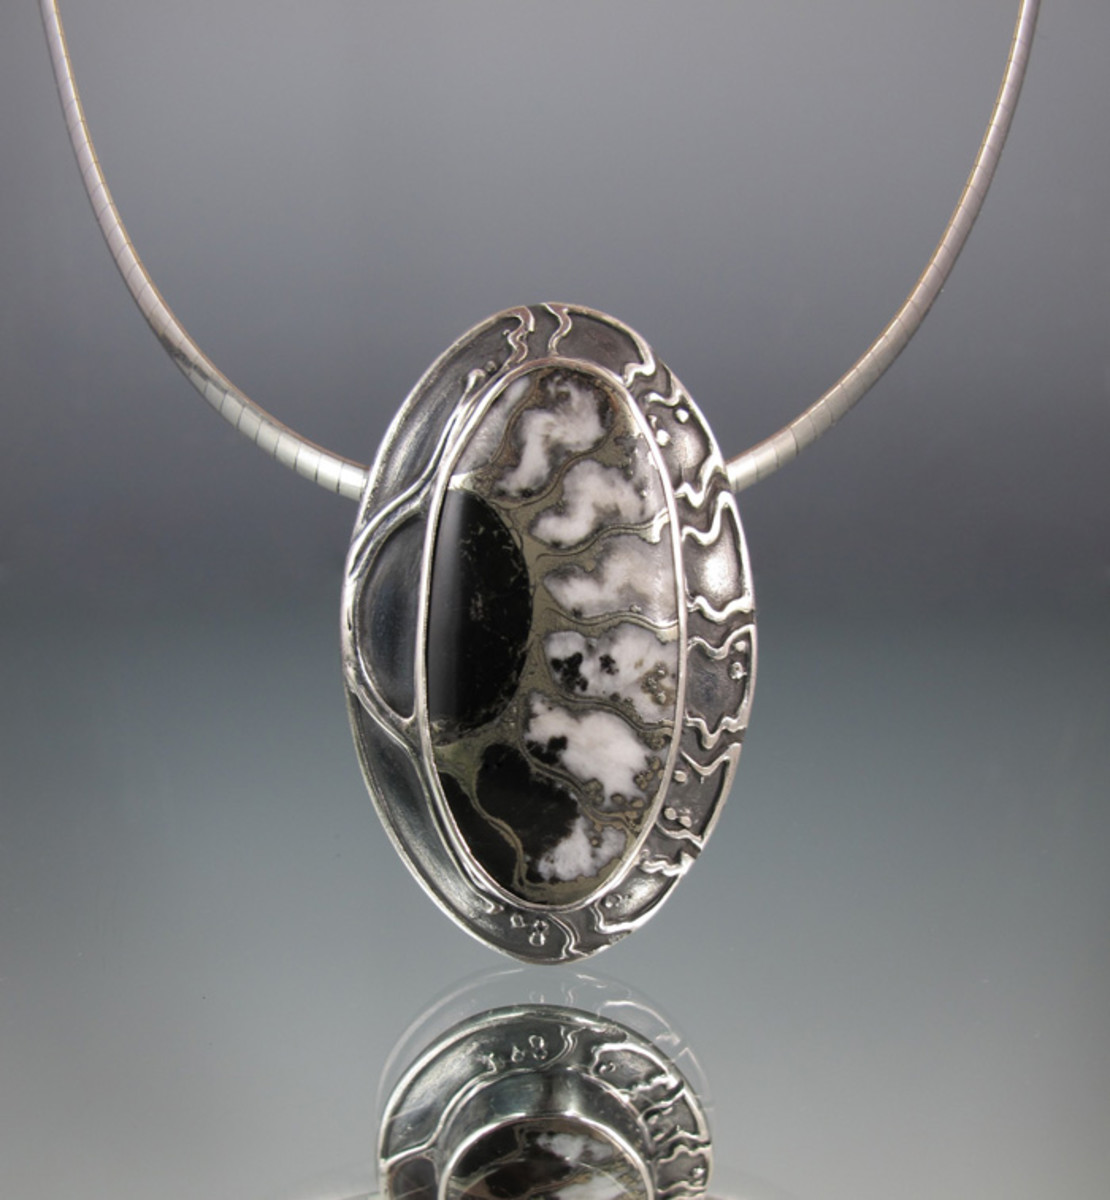 For this pendant, Lisa extended the distinctive patterns in an ammonite fossil cabochon stone onto the backplate of the silver metal clay bezel setting.